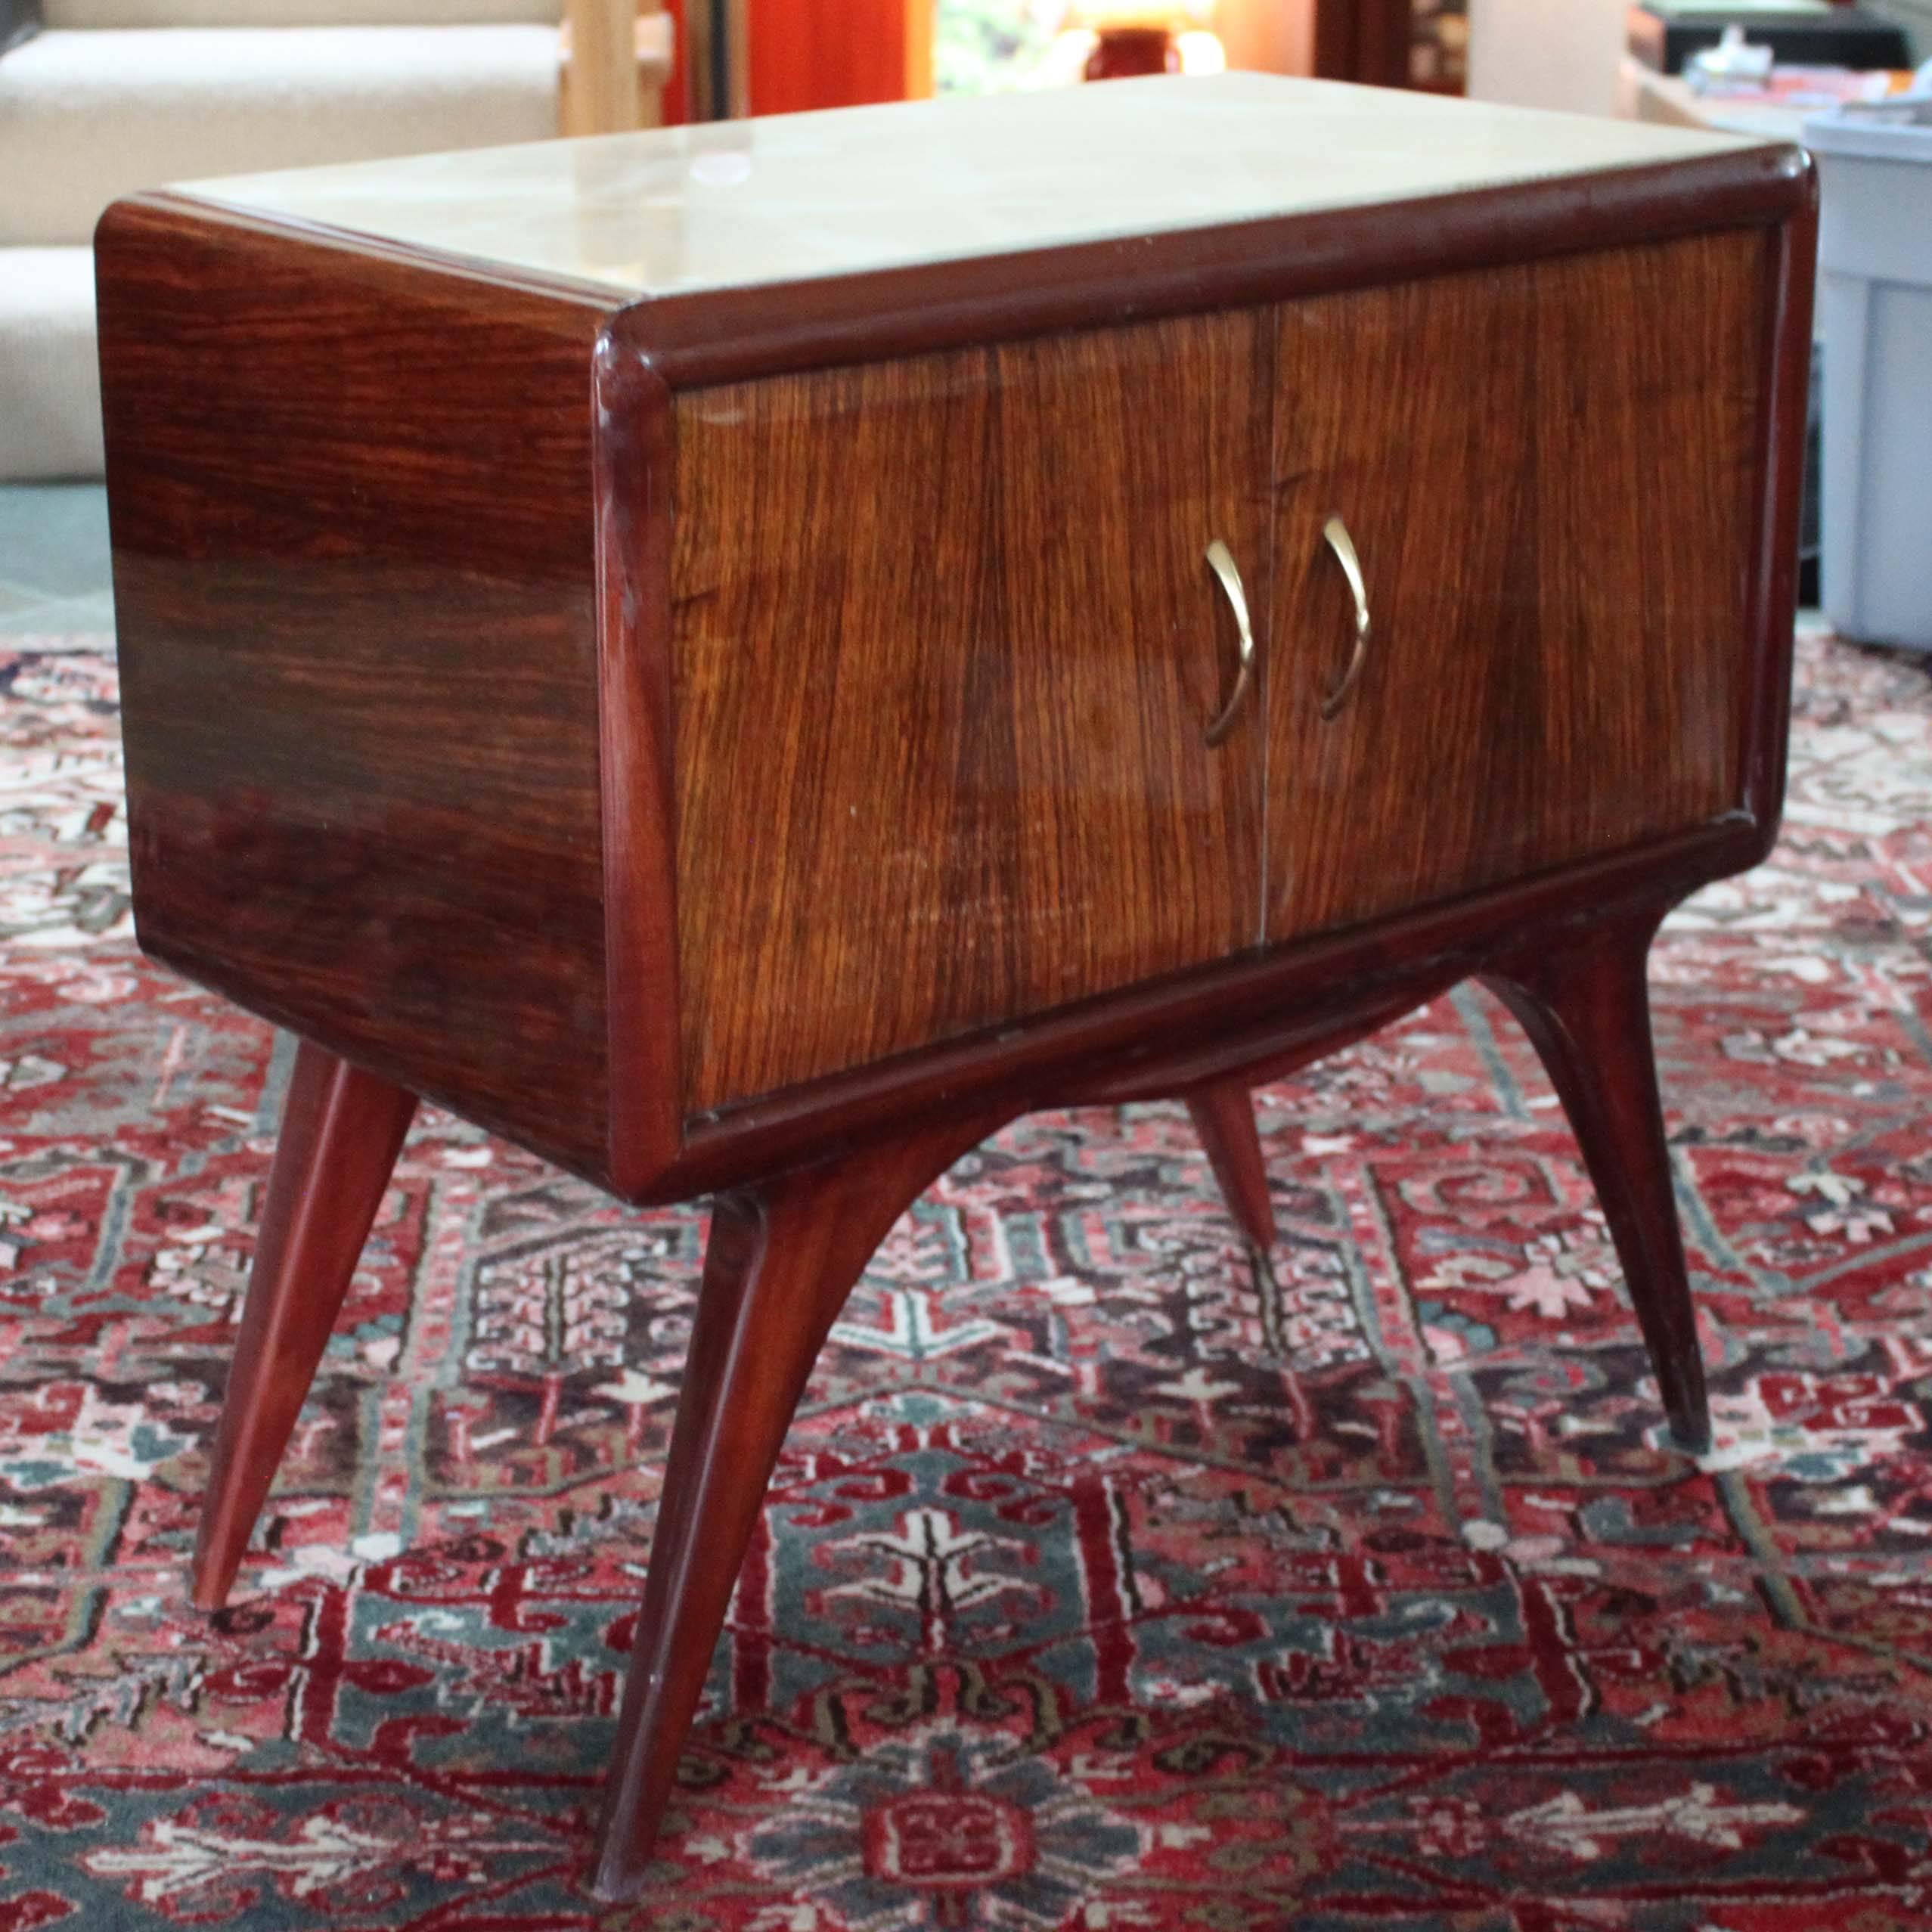 Mahogany side table attributed to Osvaldo Borsani in the modernist style. Original ivory tone glass top over a cabinet with brass hardware. Good overall condition with minor wear consistent with age and use.